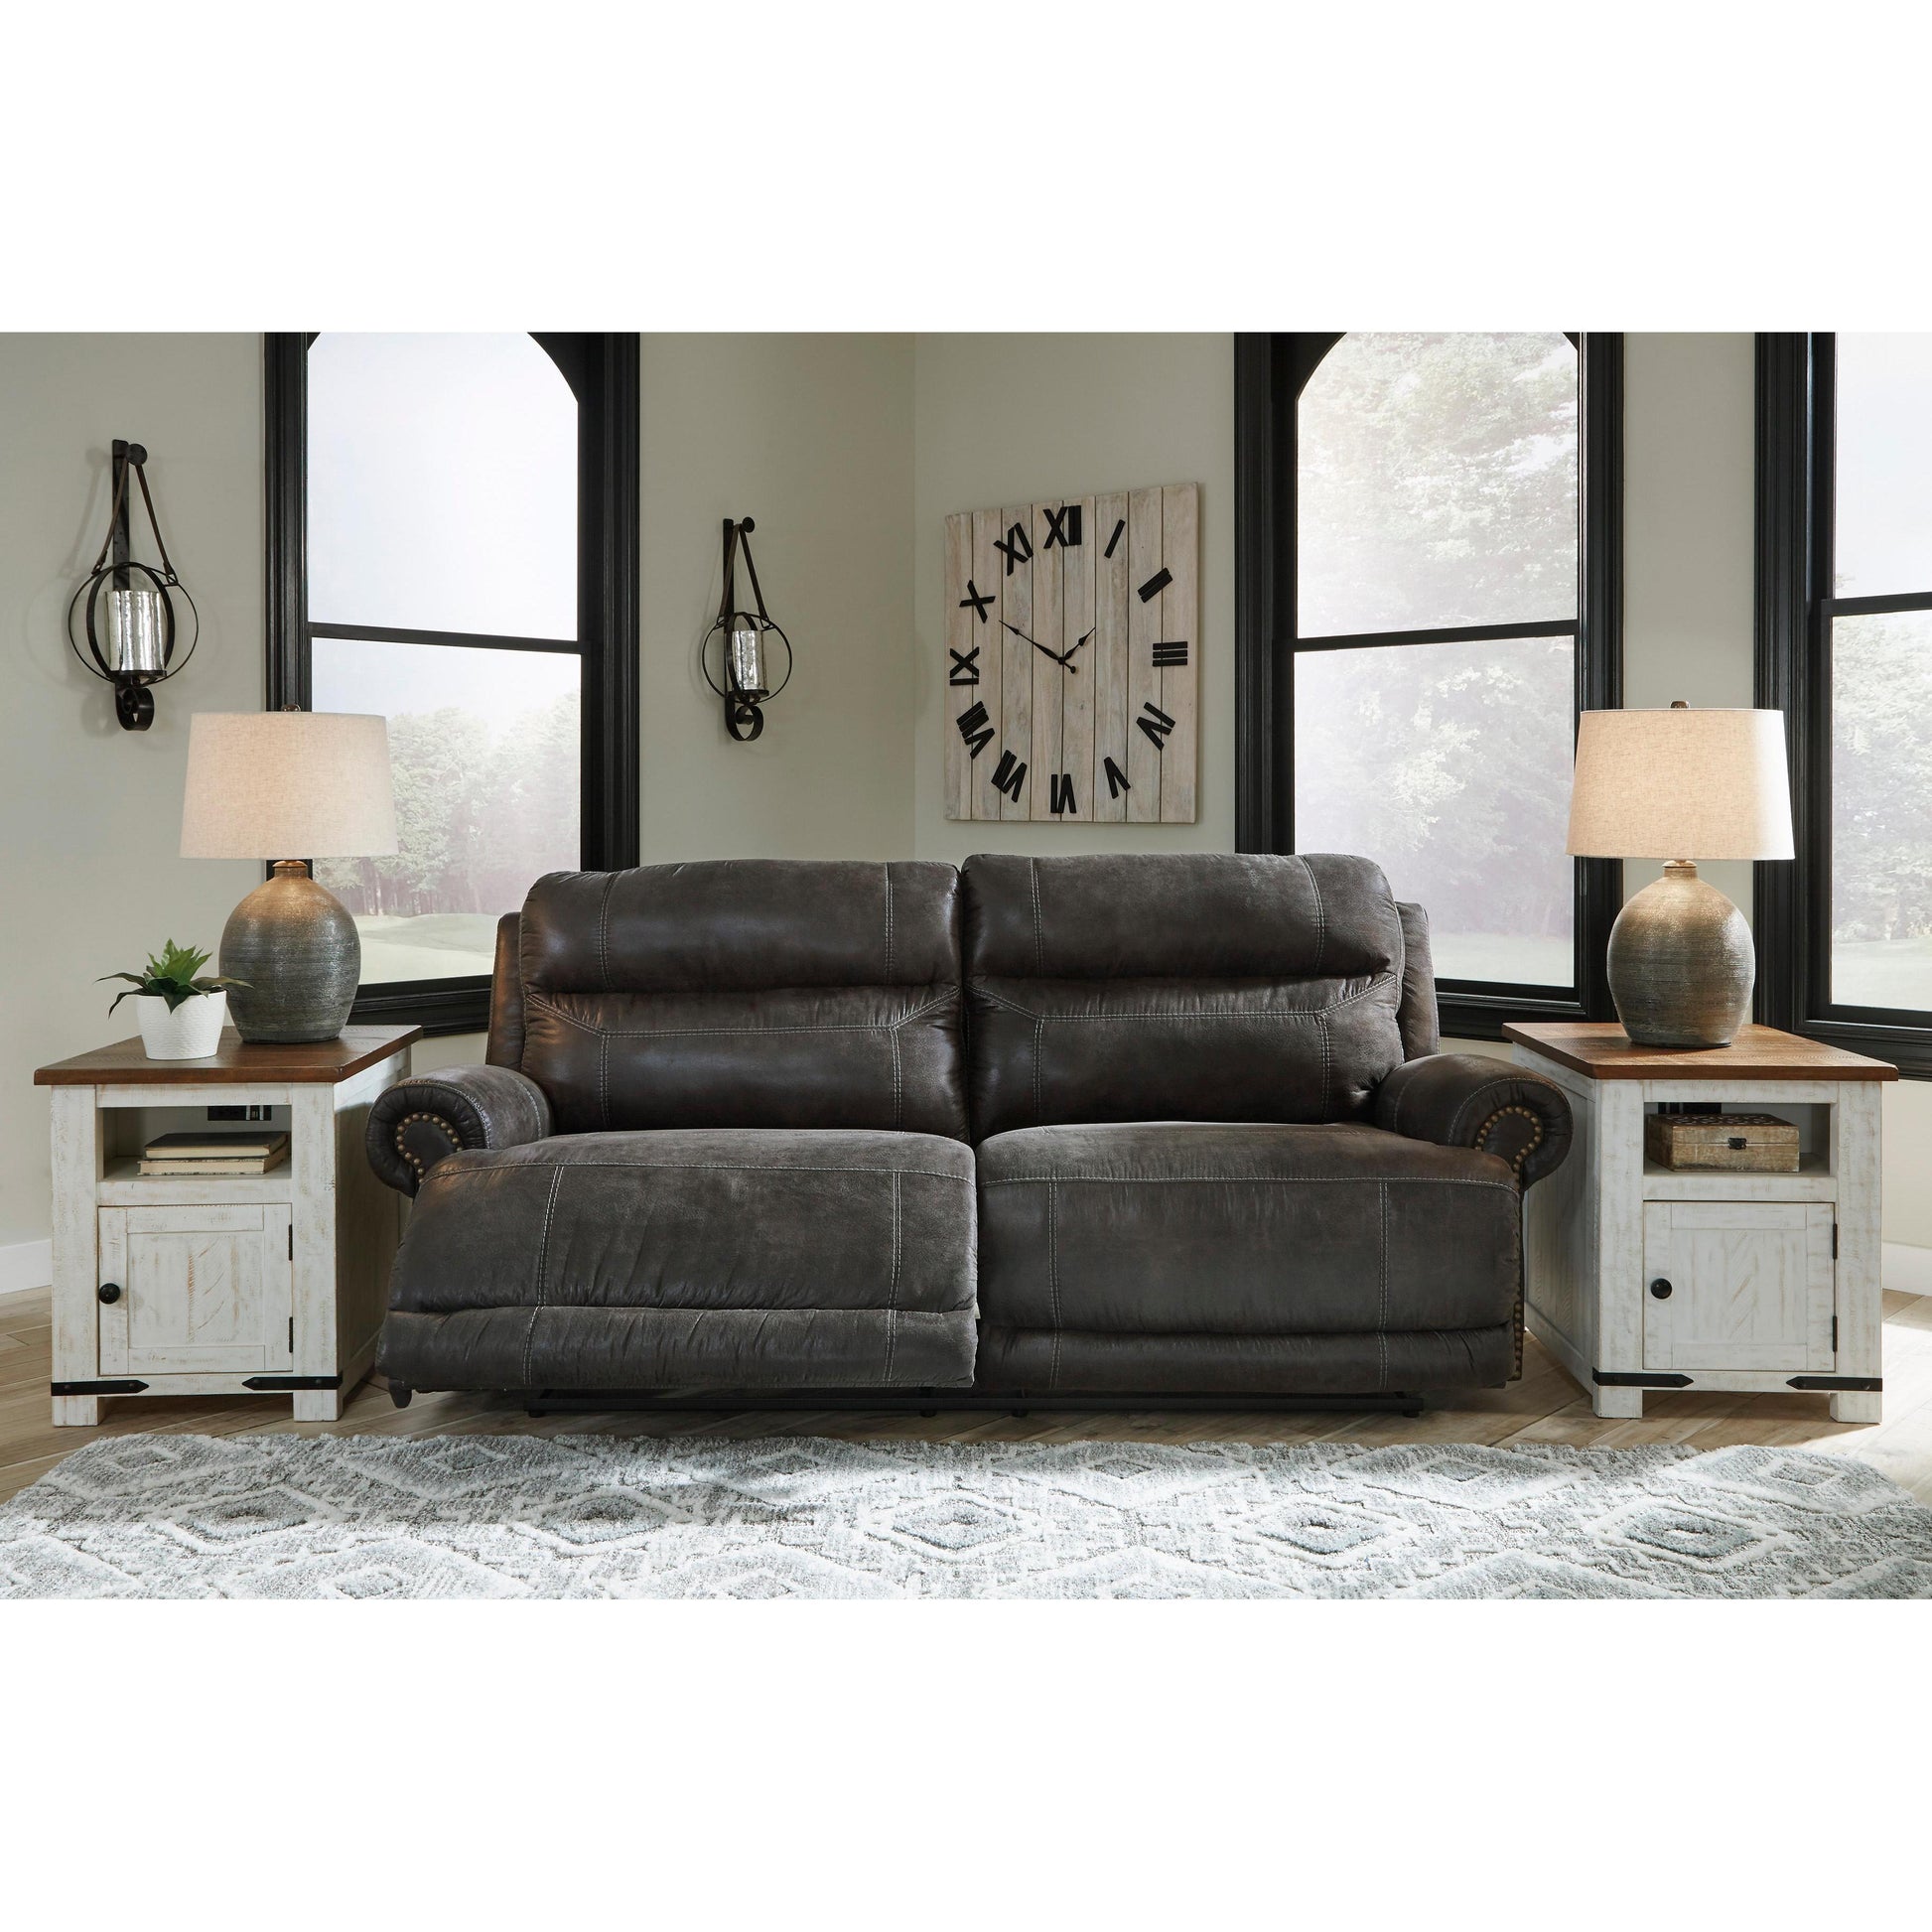 Signature Design by Ashley Grearview 65005U1 2 pc Power Reclining Living Room Set IMAGE 3